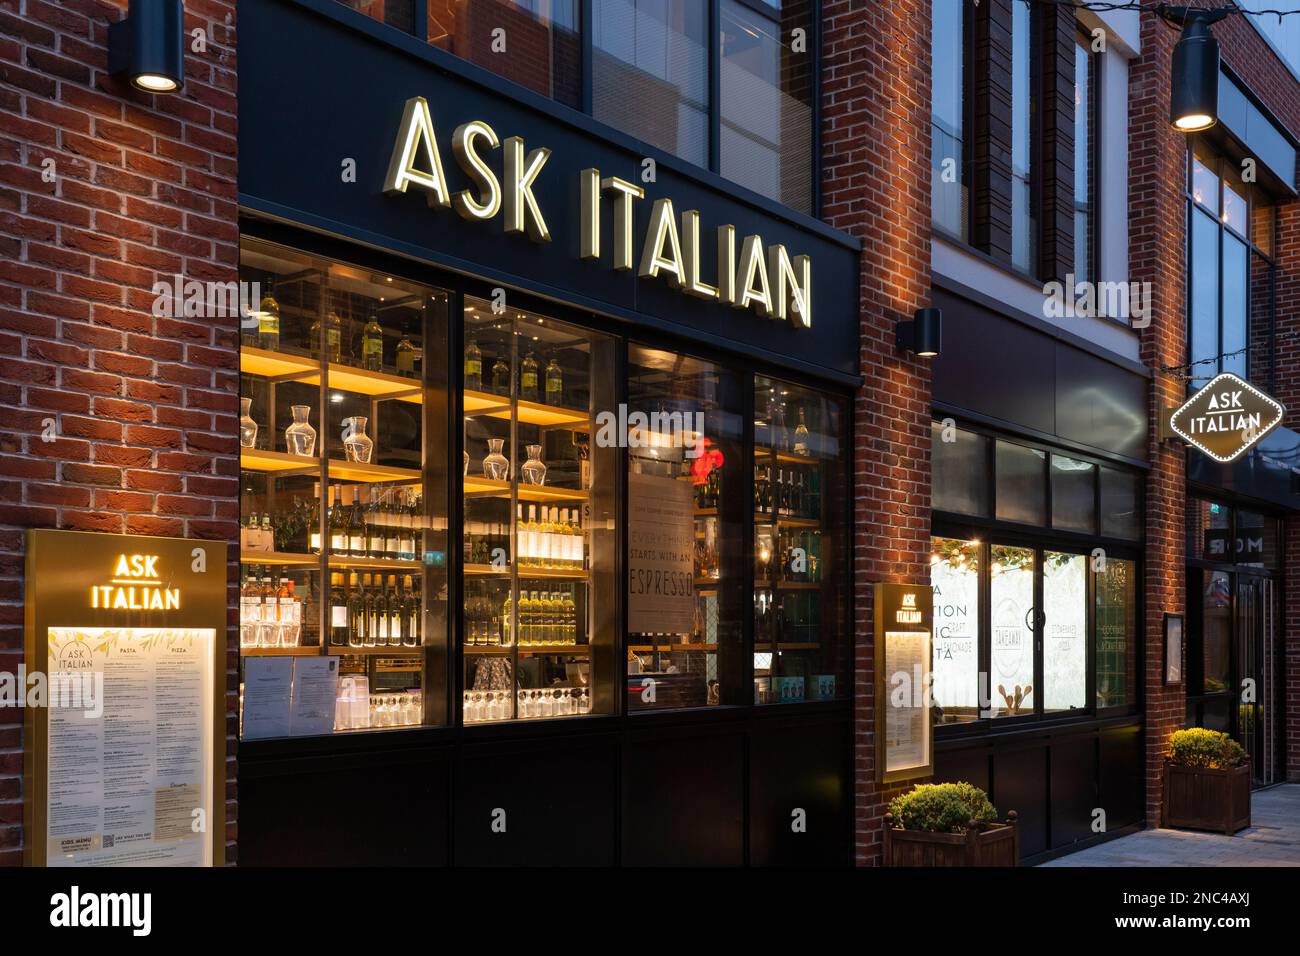 The exterior of Ask Italian restaurant lit up at night with wine bottles in the windows and a menu on the wall. Bell Court, Stratford upon Avon, UK Stock Photo